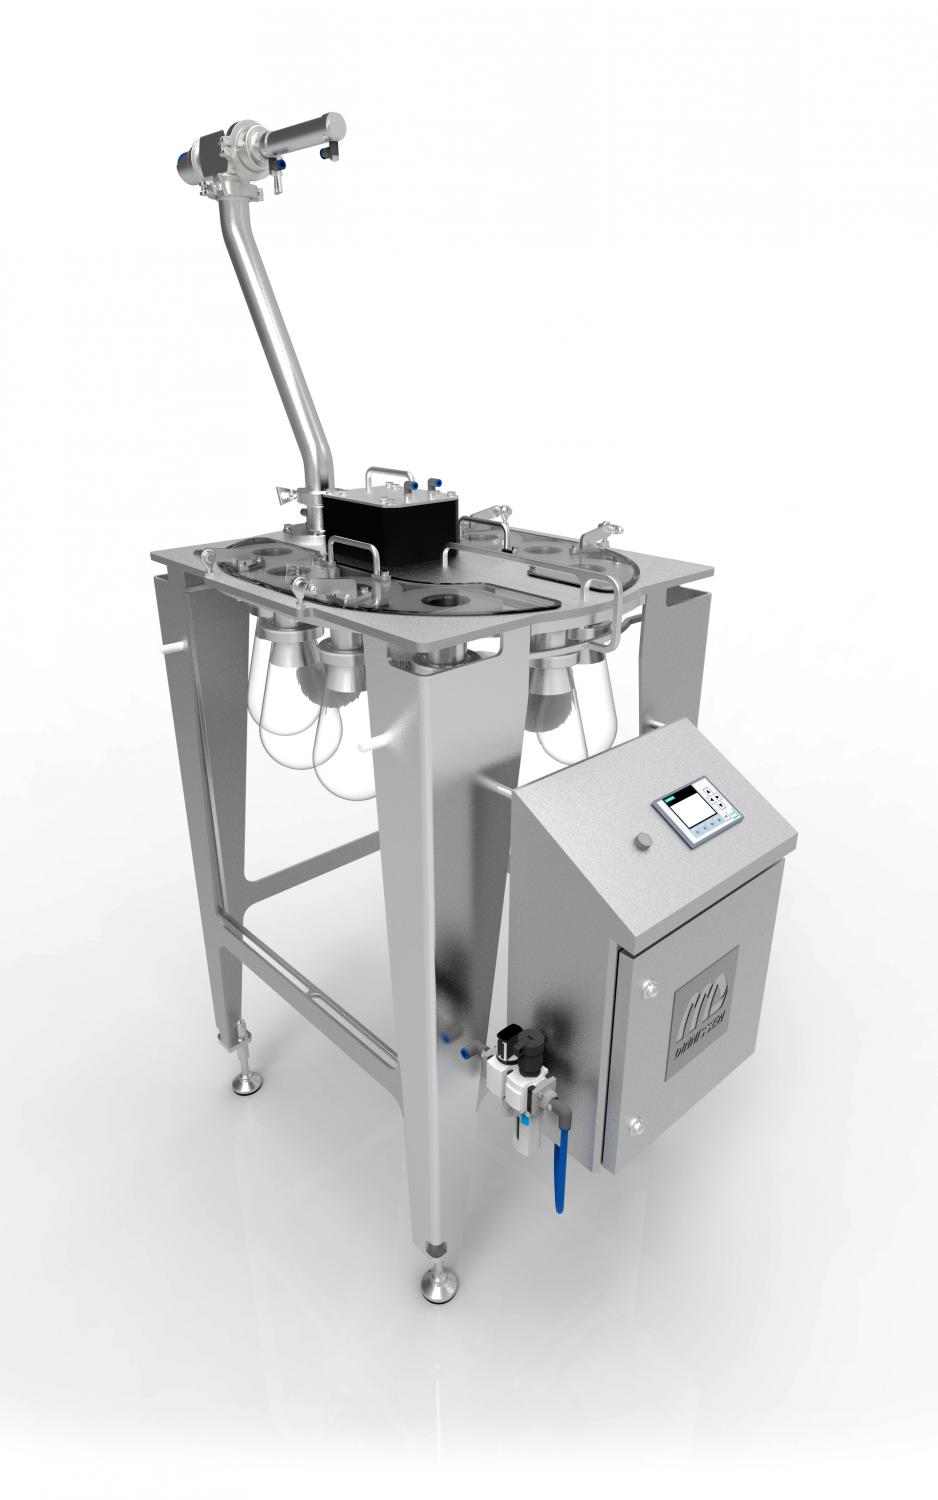 Sample unit and carousel